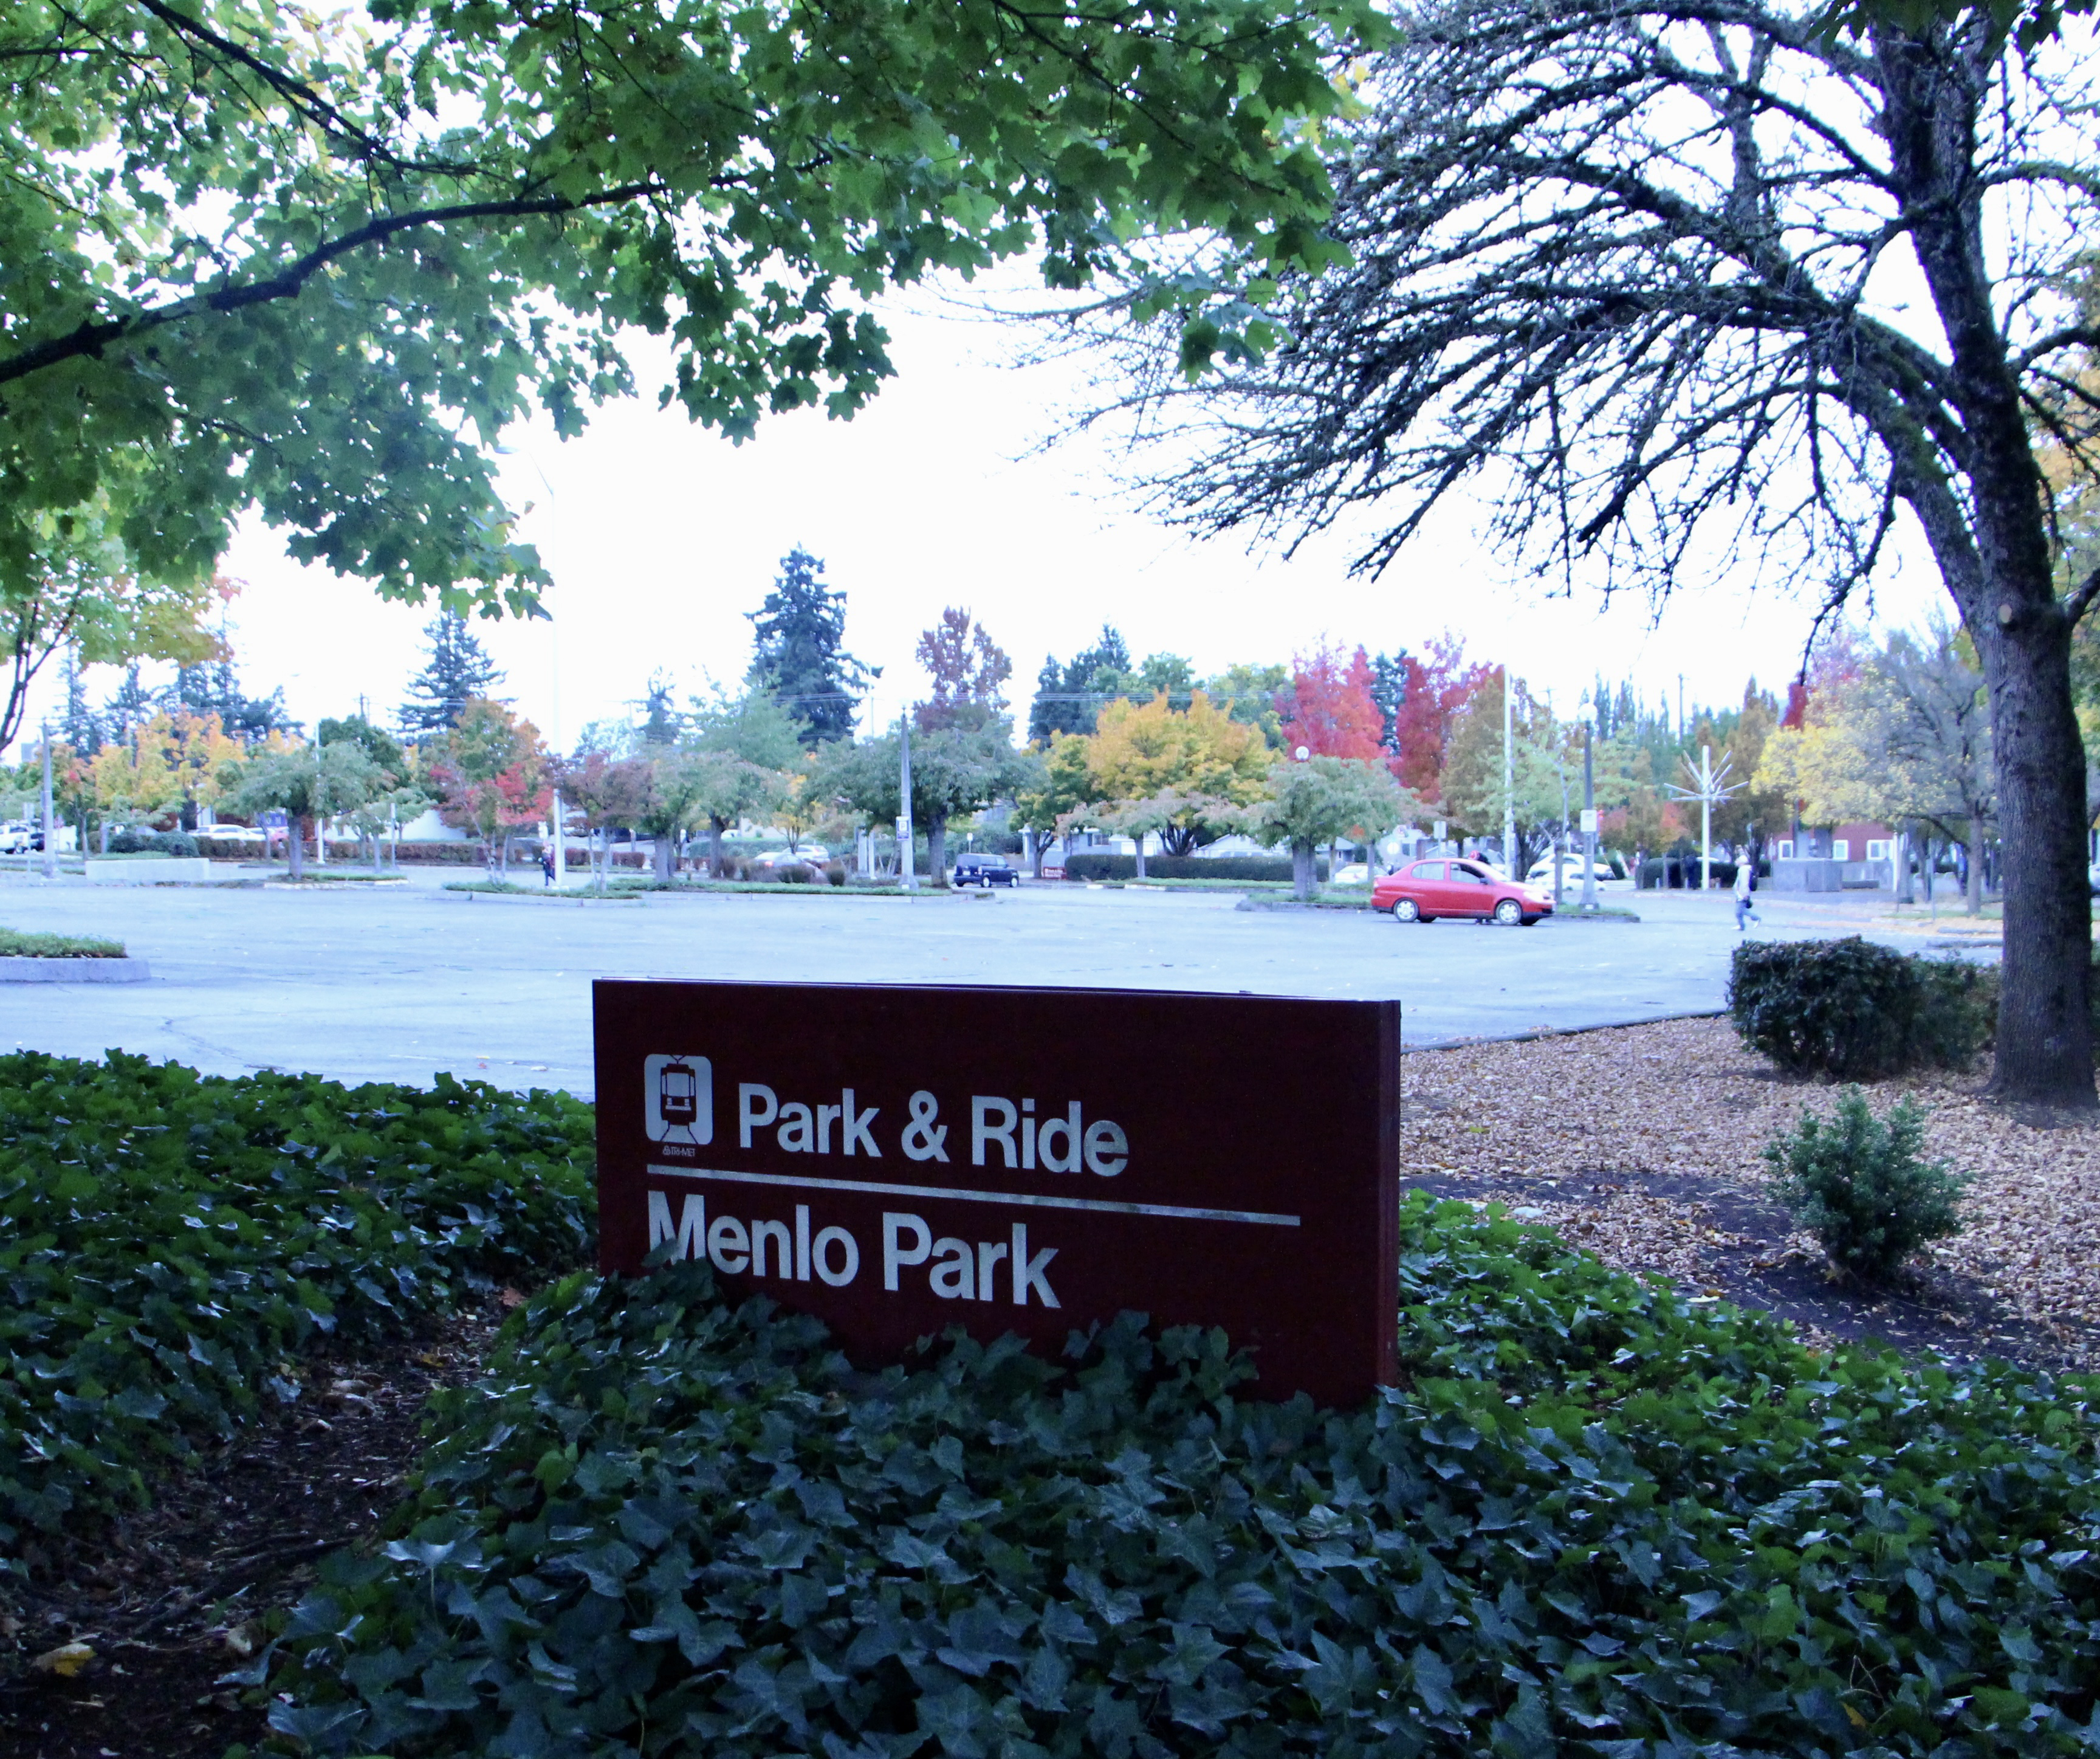 Photo of a sign in a patch of greenery in a parking lot. The sign says "Park & Ride Menlo Park."